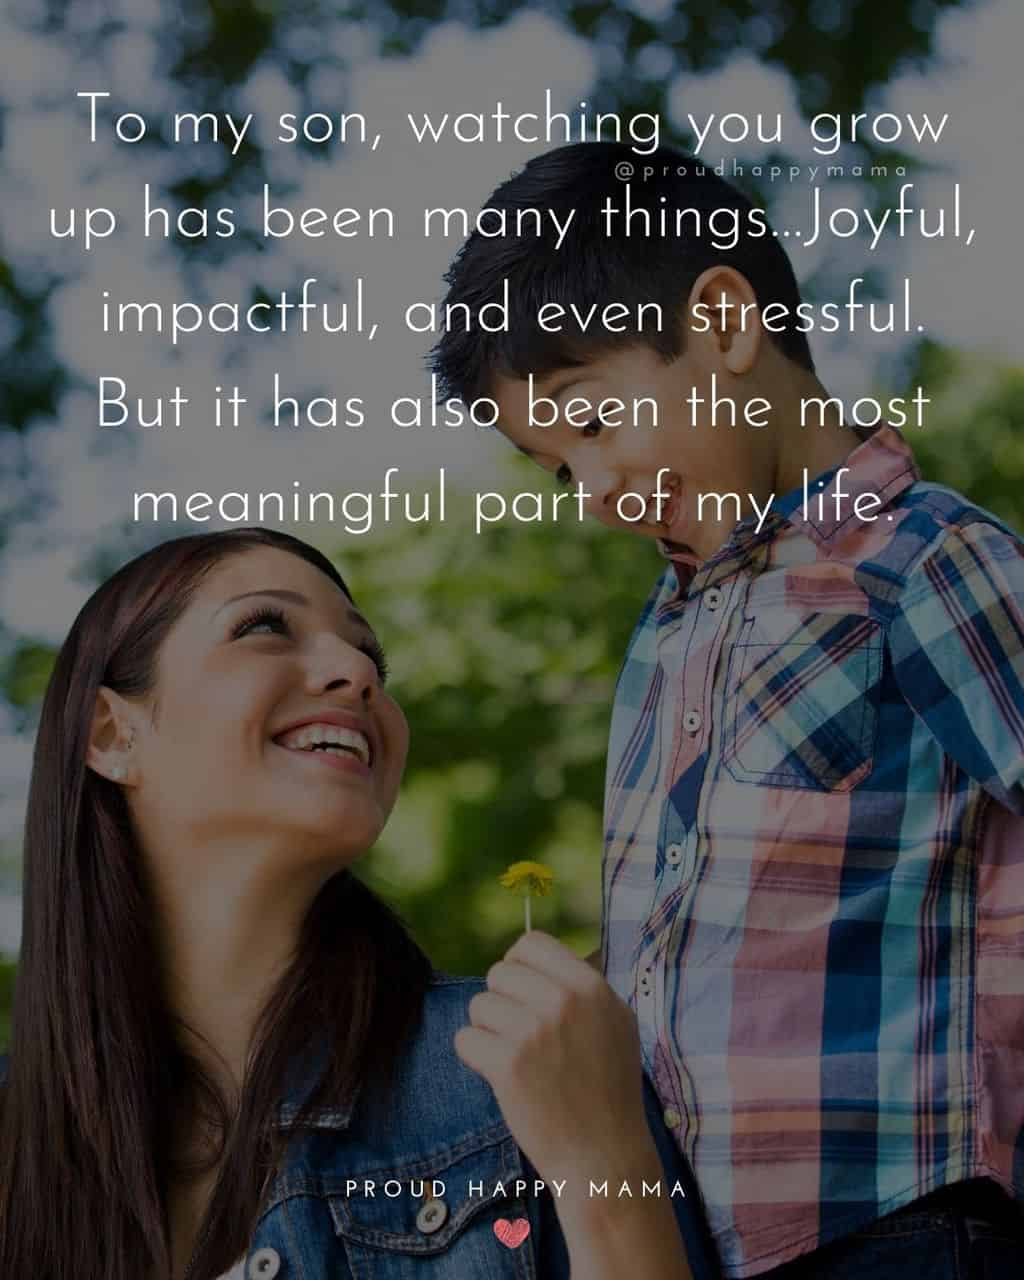 Son Quotes - To my son, watching you grow up has been many things…Joyful, impactful, and even stressful. But it has also been